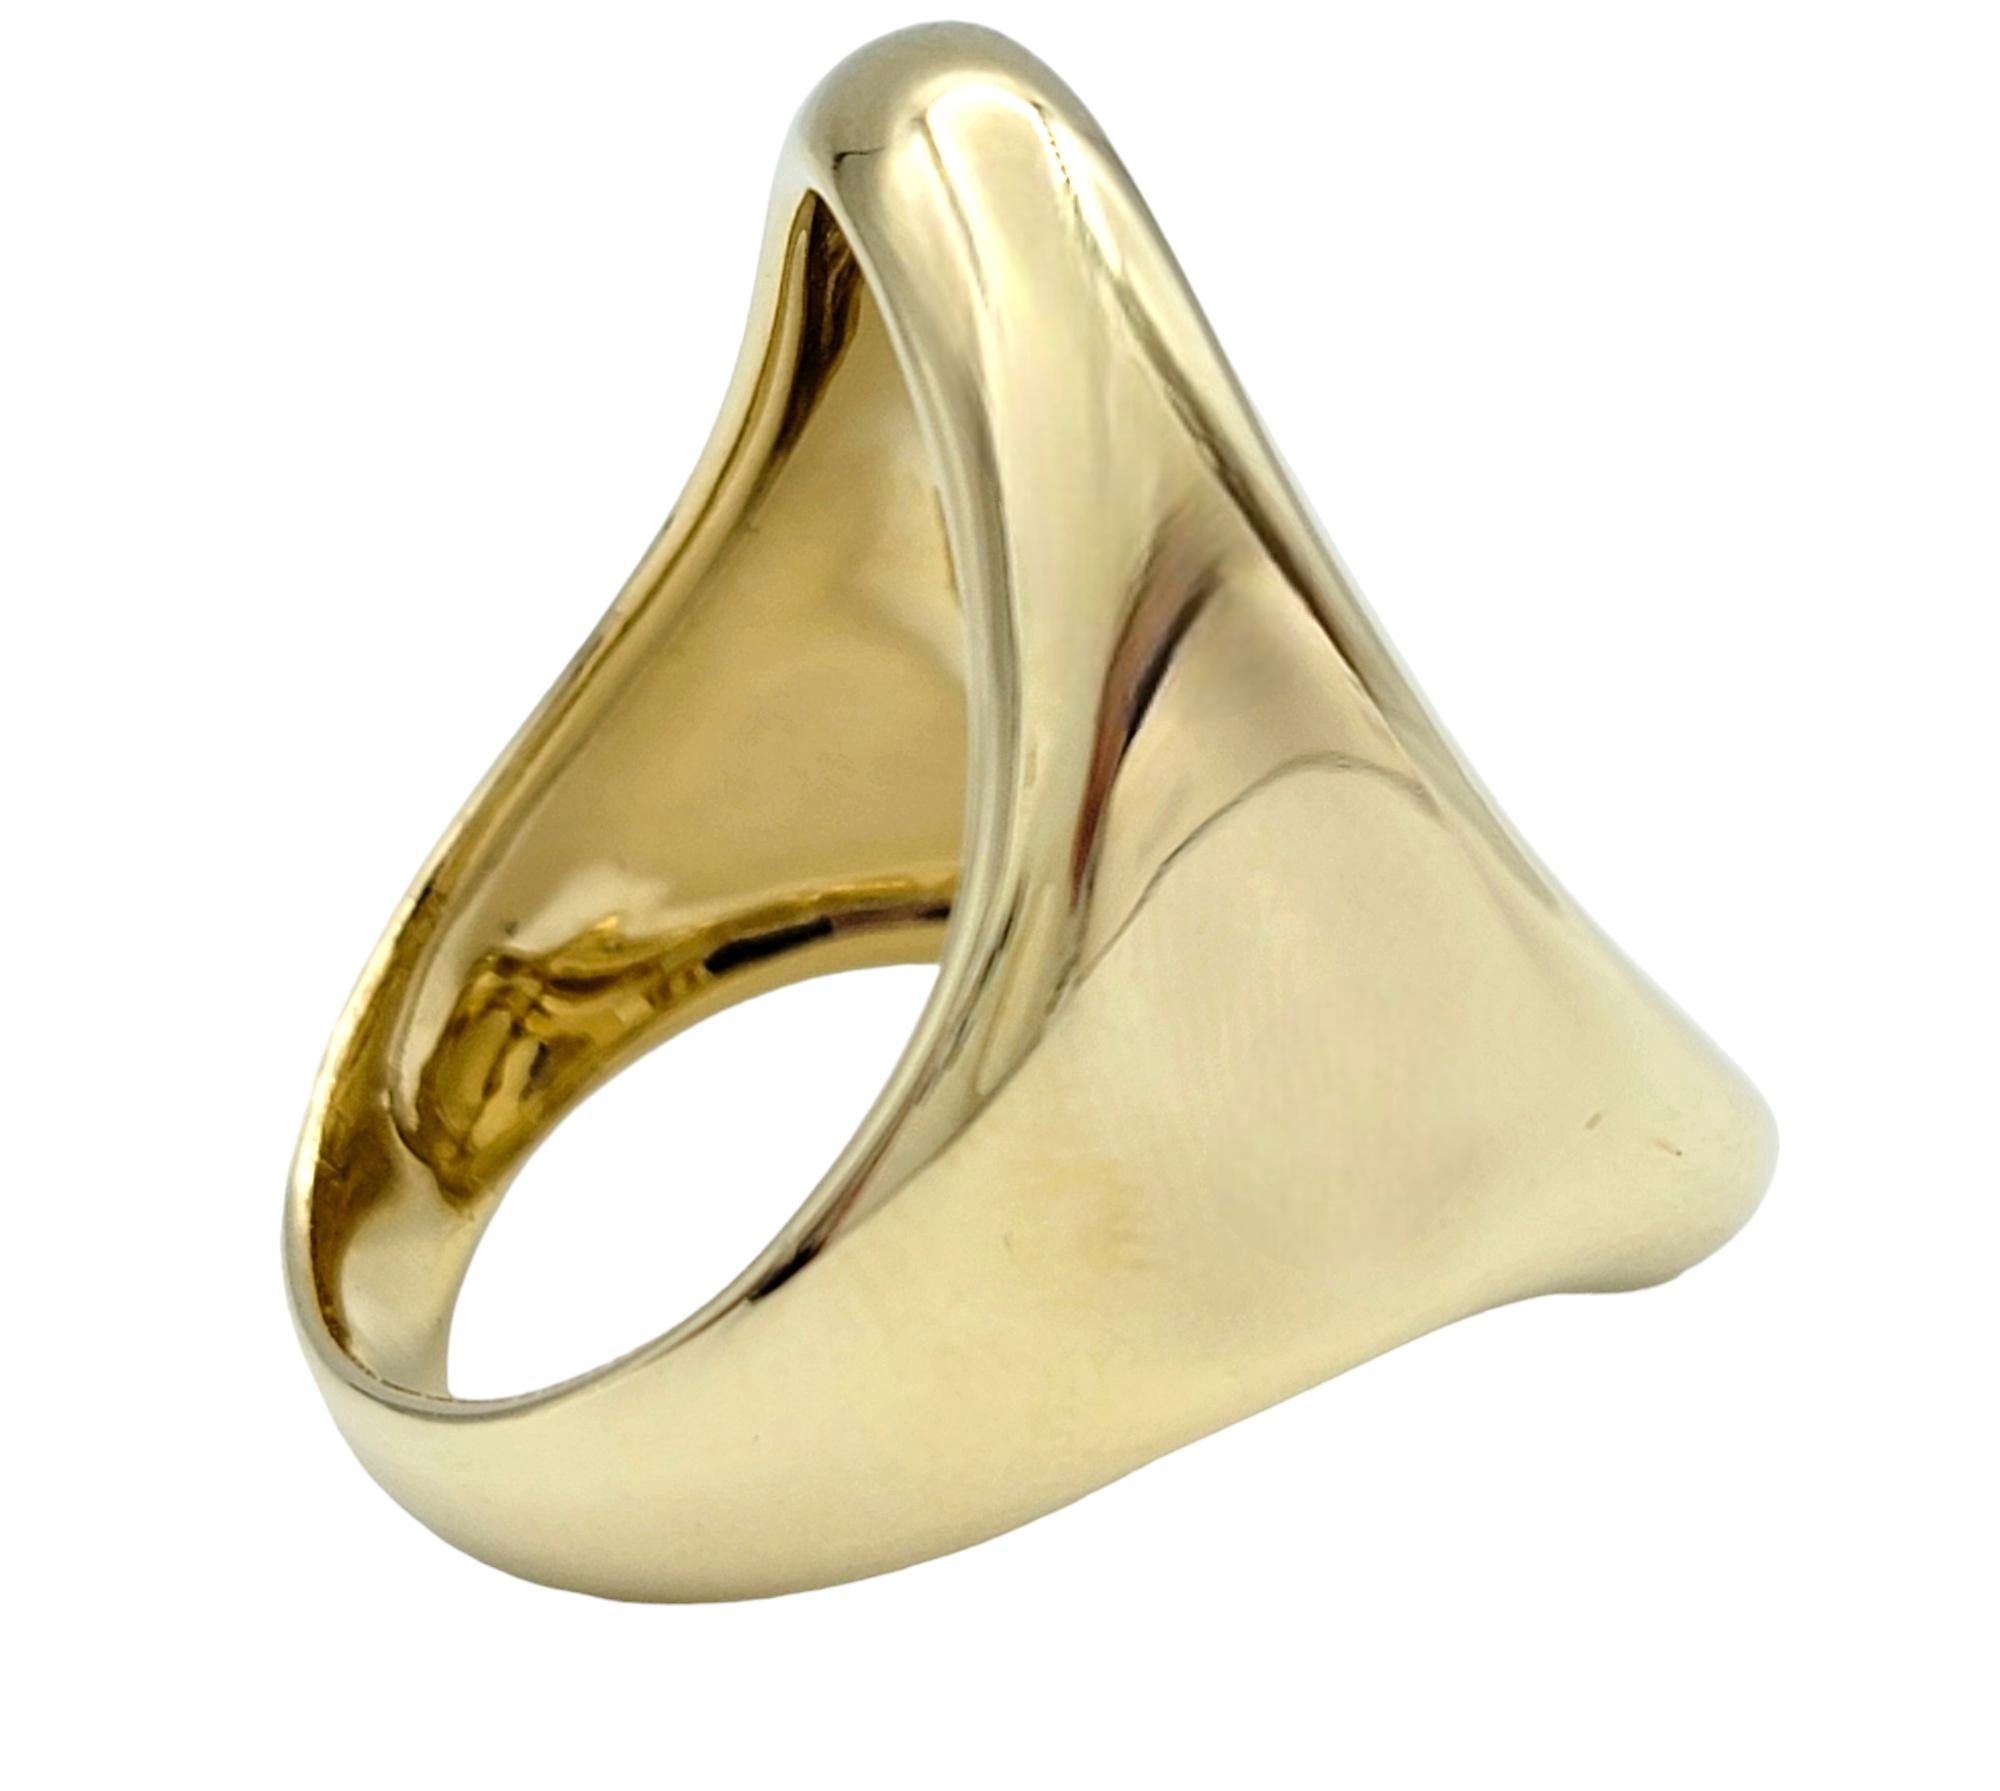 Robert Lee Morris RLM Studio Concave Oval Cocktail Ring in 14 Karat Yellow Gold In Good Condition For Sale In Scottsdale, AZ